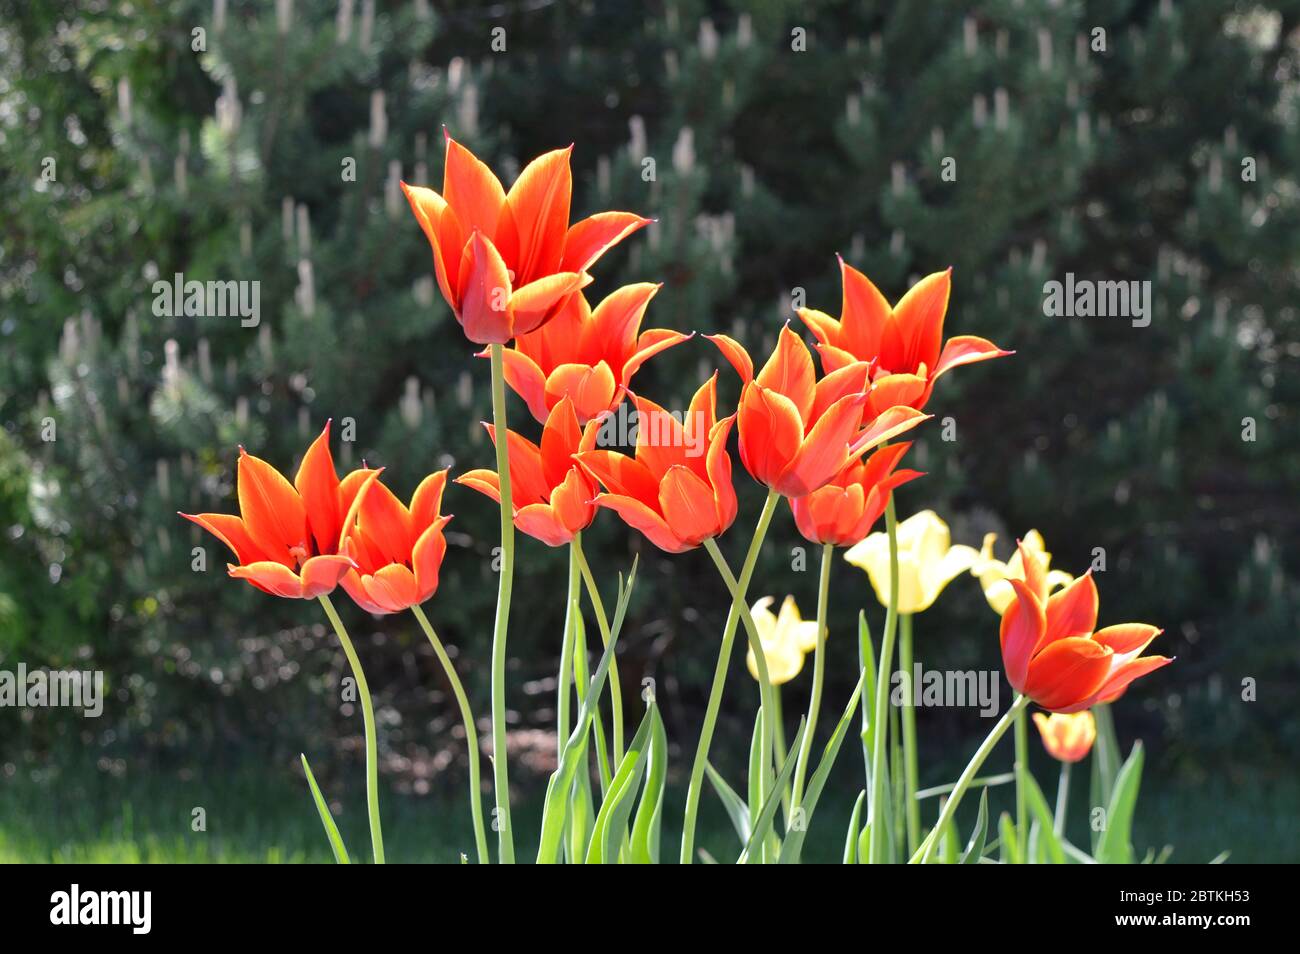 Red and yellow tulips blossom and open wide in the early morning sun.  Signal that good weather and longer days are here. Stock Photo